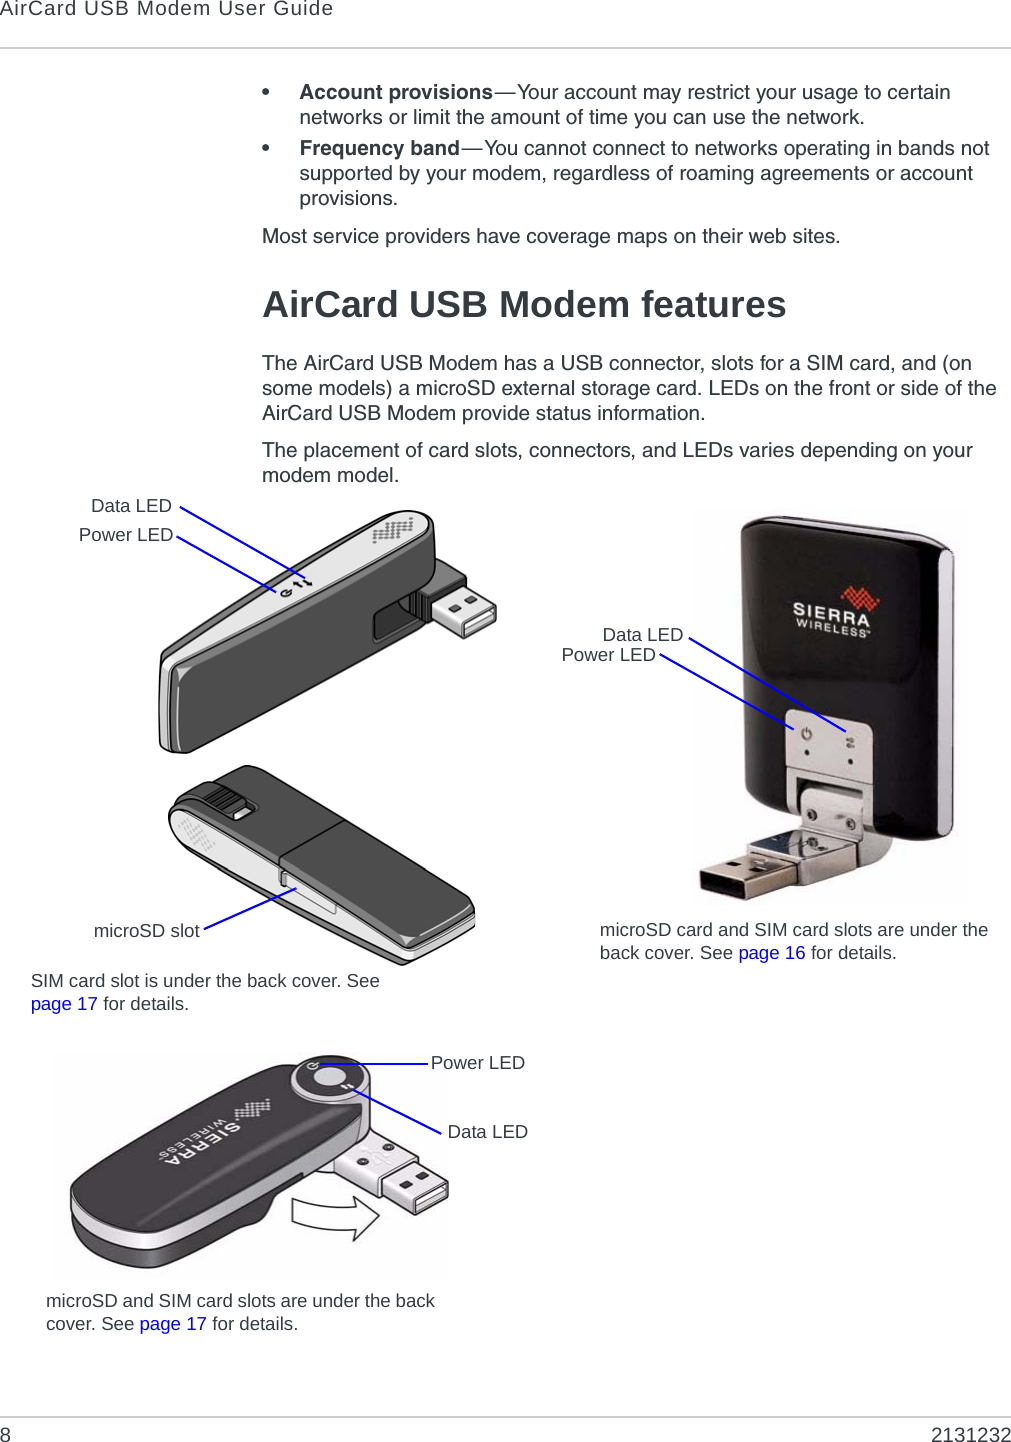 AirCard USB Modem User Guide82131232• Account provisions—Your account may restrict your usage to certain networks or limit the amount of time you can use the network.• Frequency band—You cannot connect to networks operating in bands not supported by your modem, regardless of roaming agreements or account provisions.Most service providers have coverage maps on their web sites.AirCard USB Modem featuresThe AirCard USB Modem has a USB connector, slots for a SIM card, and (on some models) a microSD external storage card. LEDs on the front or side of the AirCard USB Modem provide status information.The placement of card slots, connectors, and LEDs varies depending on your modem model.Power LEDData LEDPower LEDData LEDmicroSD card and SIM card slots are under the back cover. See page 16 for details.microSD slotSIM card slot is under the back cover. See page 17 for details.microSD and SIM card slots are under the back cover. See page 17 for details.Data LEDPower LED